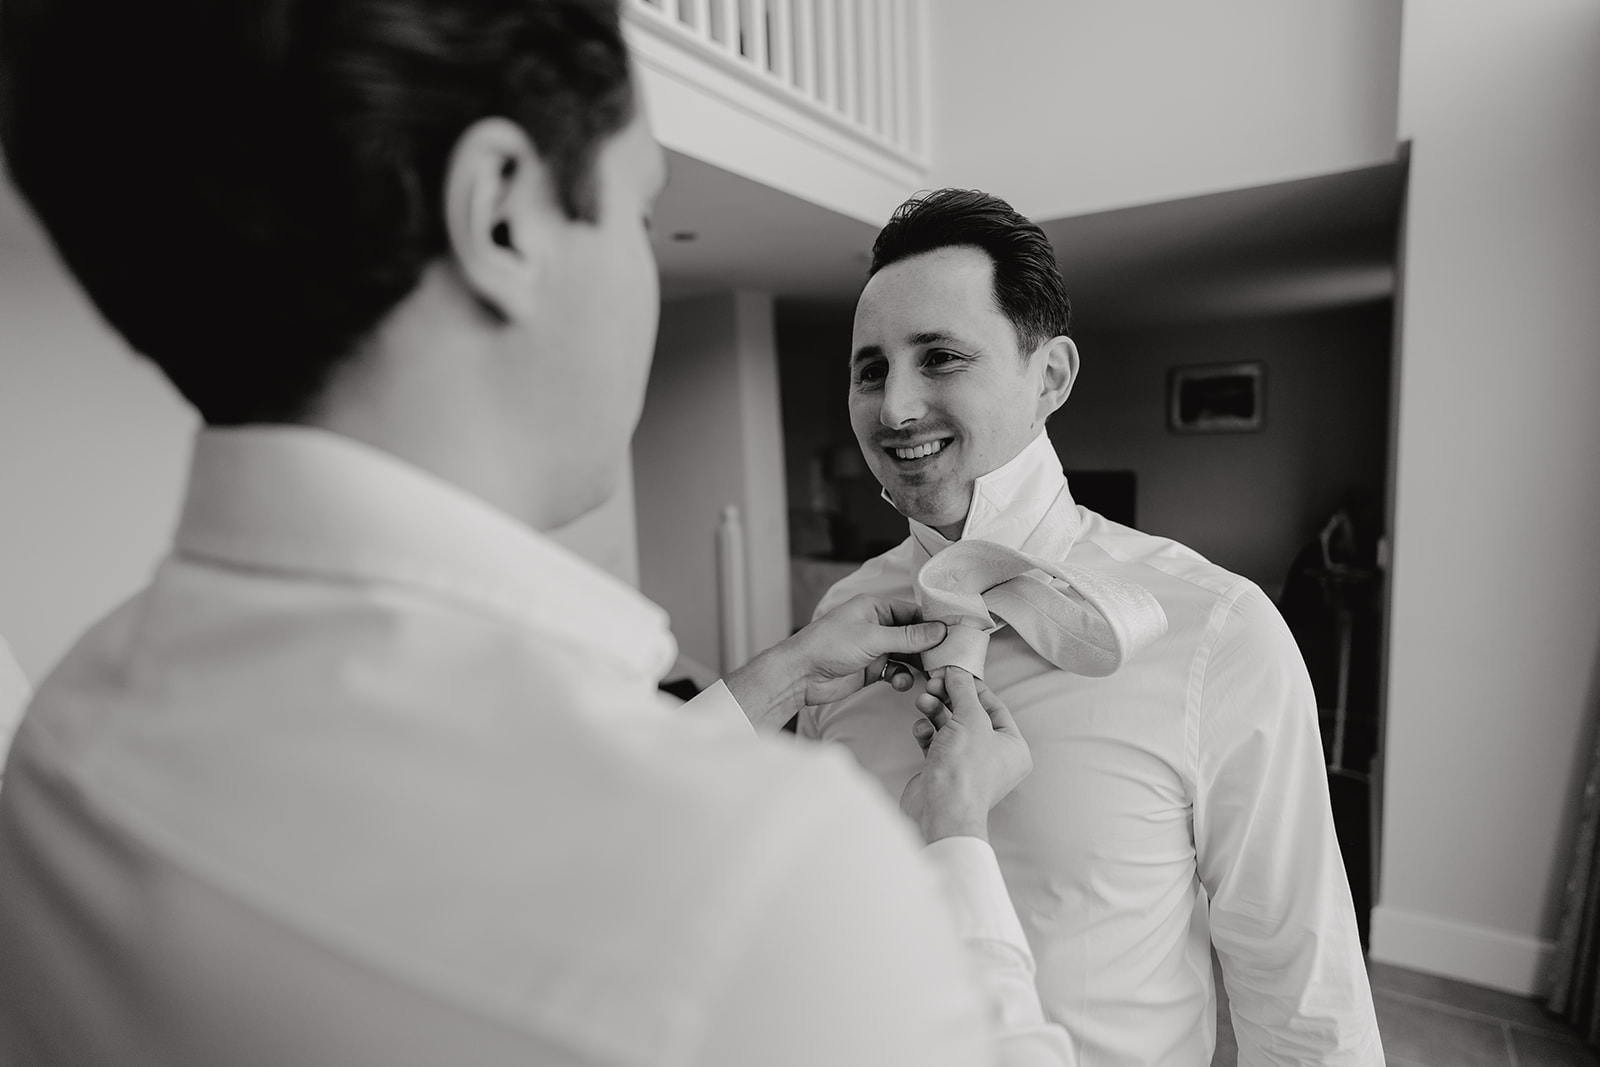 The groom, having a hand with his tie on the morning of his wedding